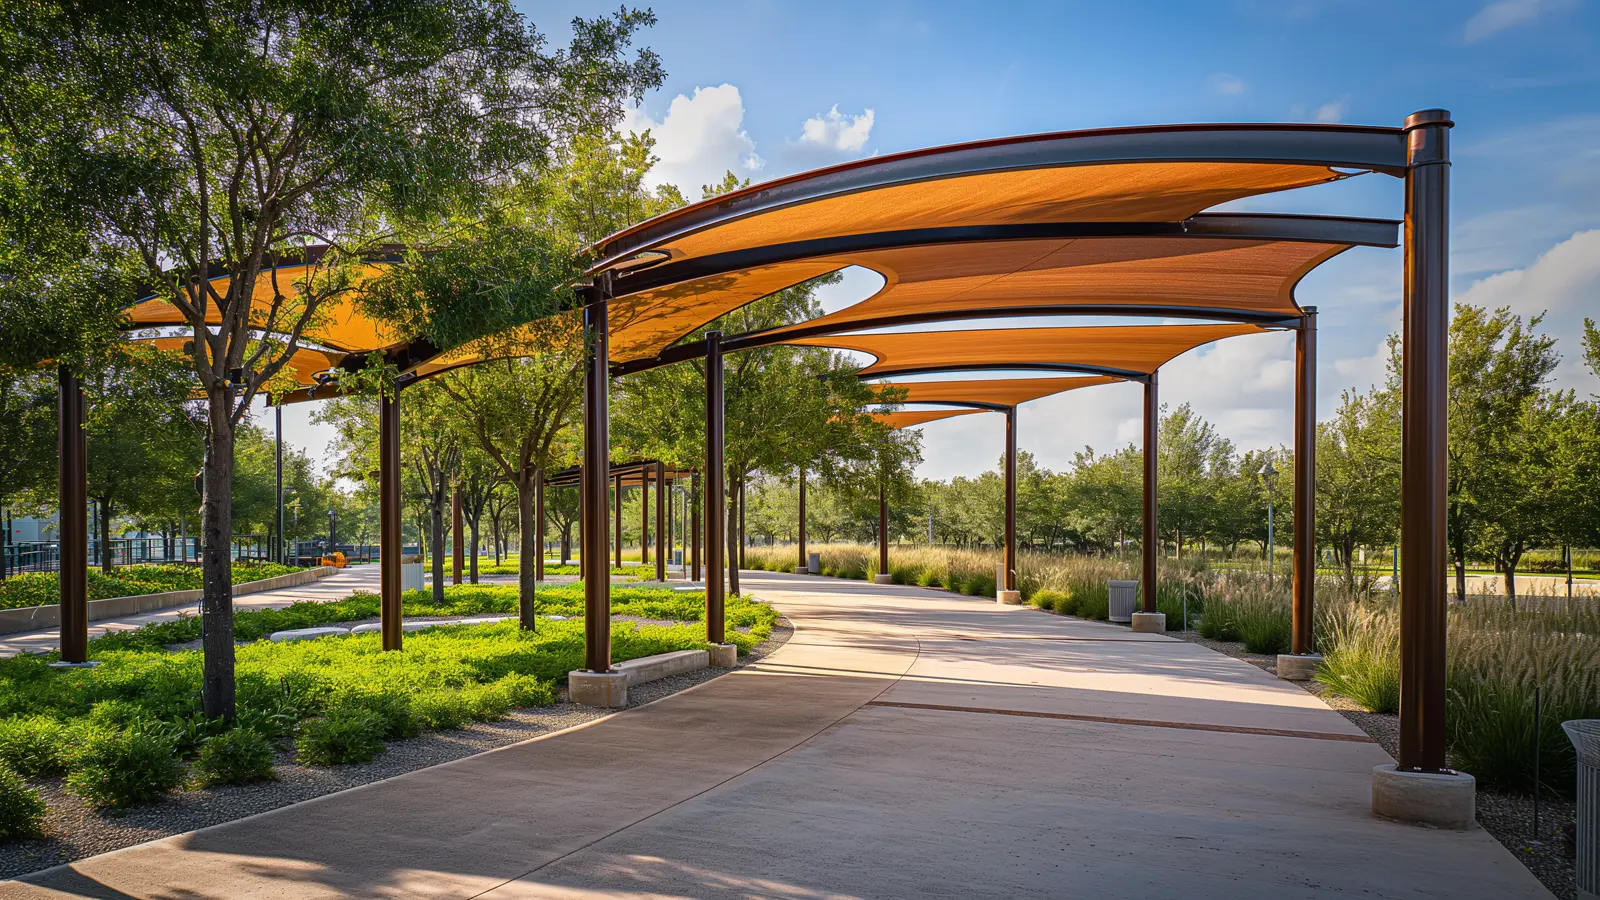 Top Benefits of Commercial Shade Structures